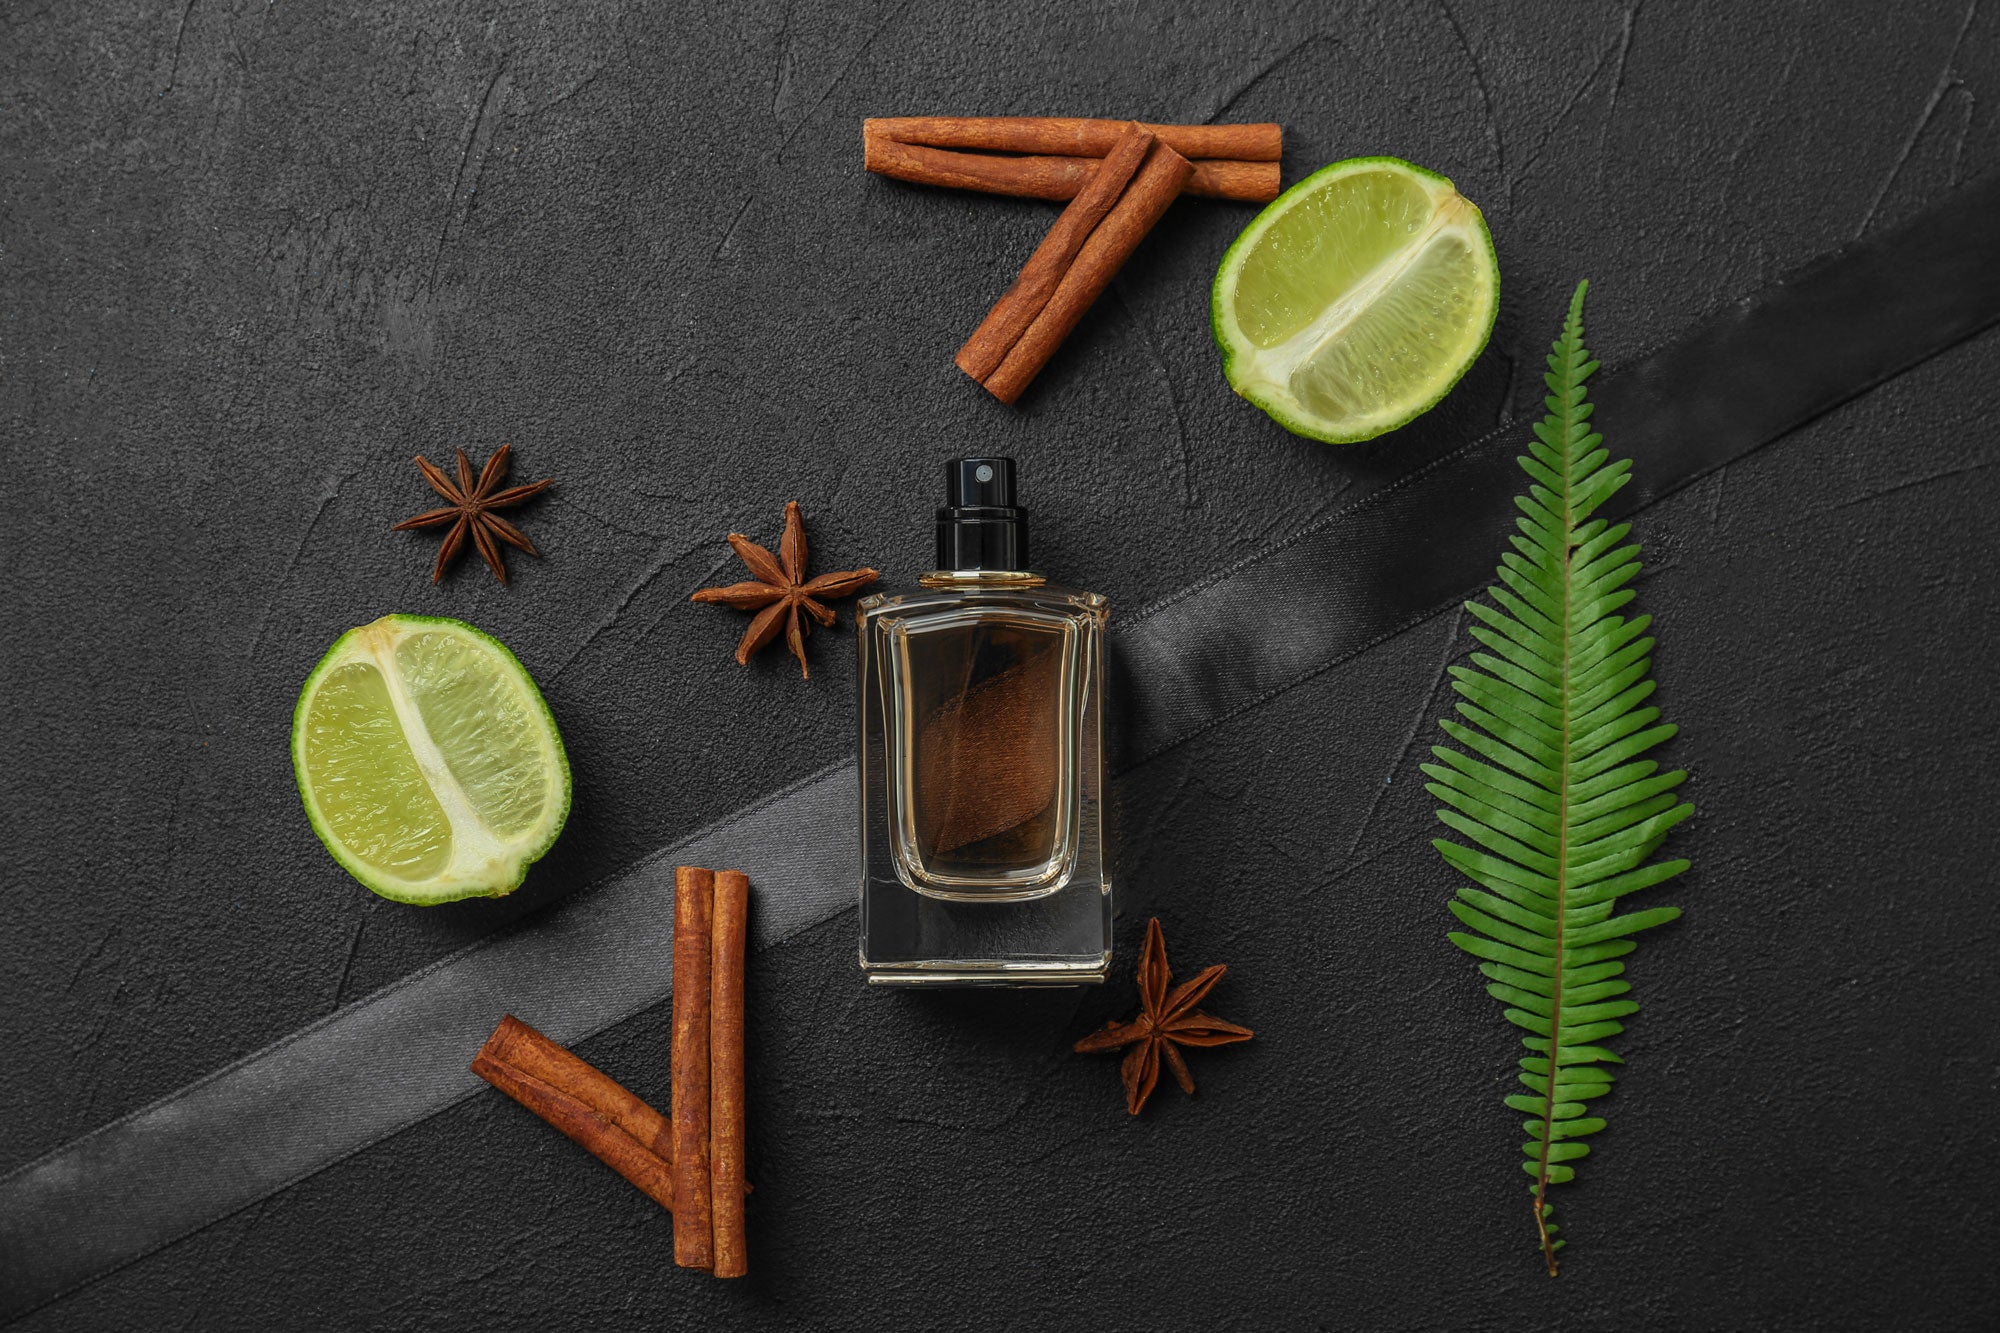 What are the different strengths of fragrances?